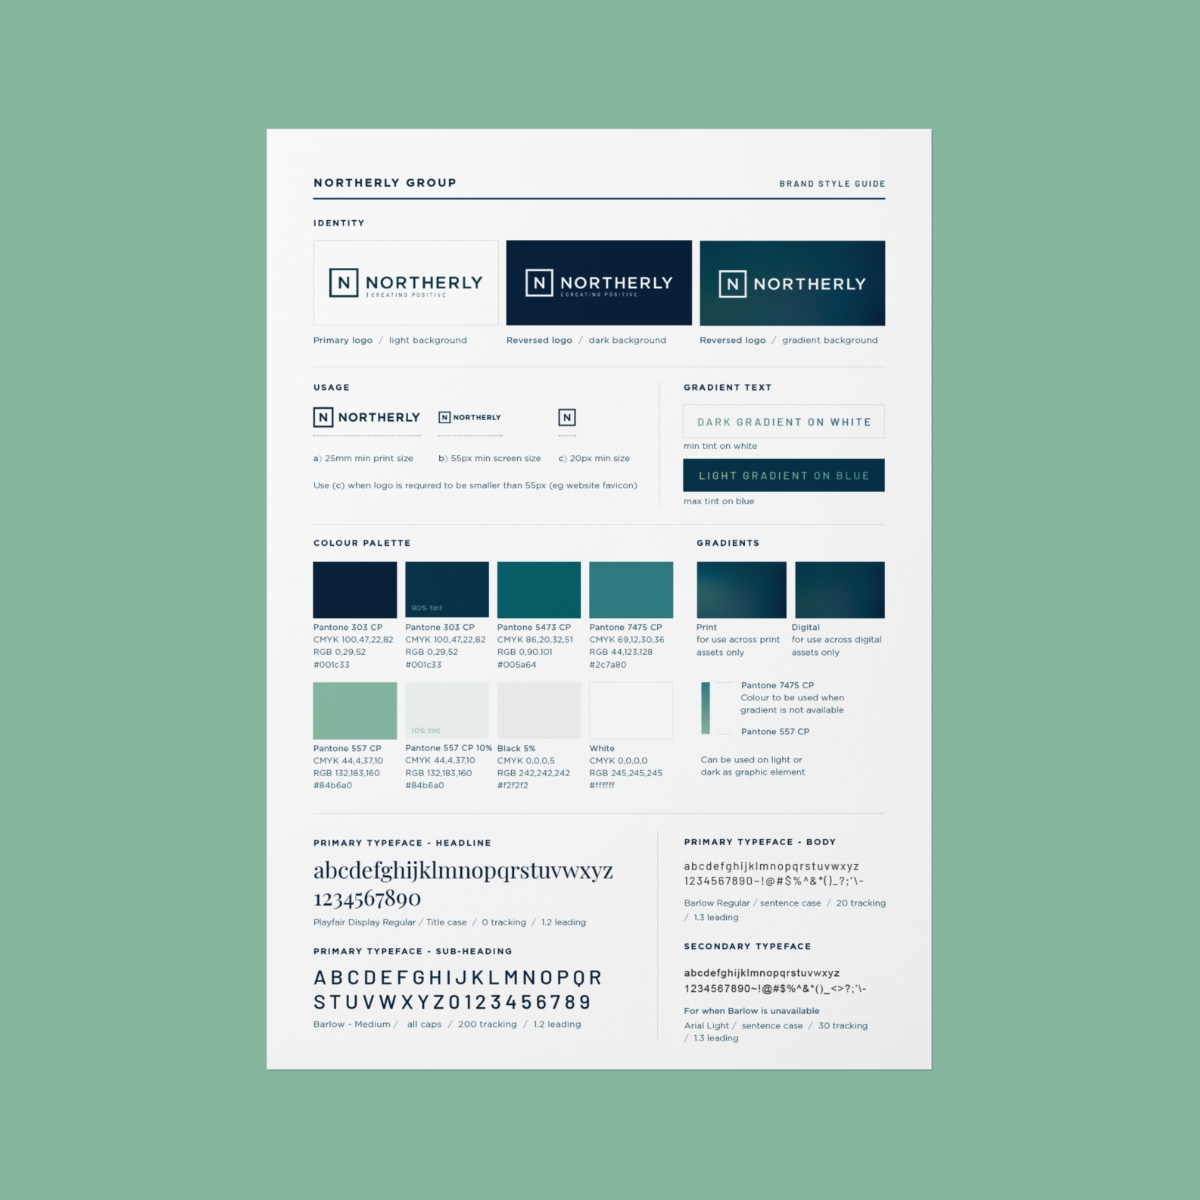 On brand.<br/>We put together a comprehensive brand style guide for client, Northerly, covering everything from the